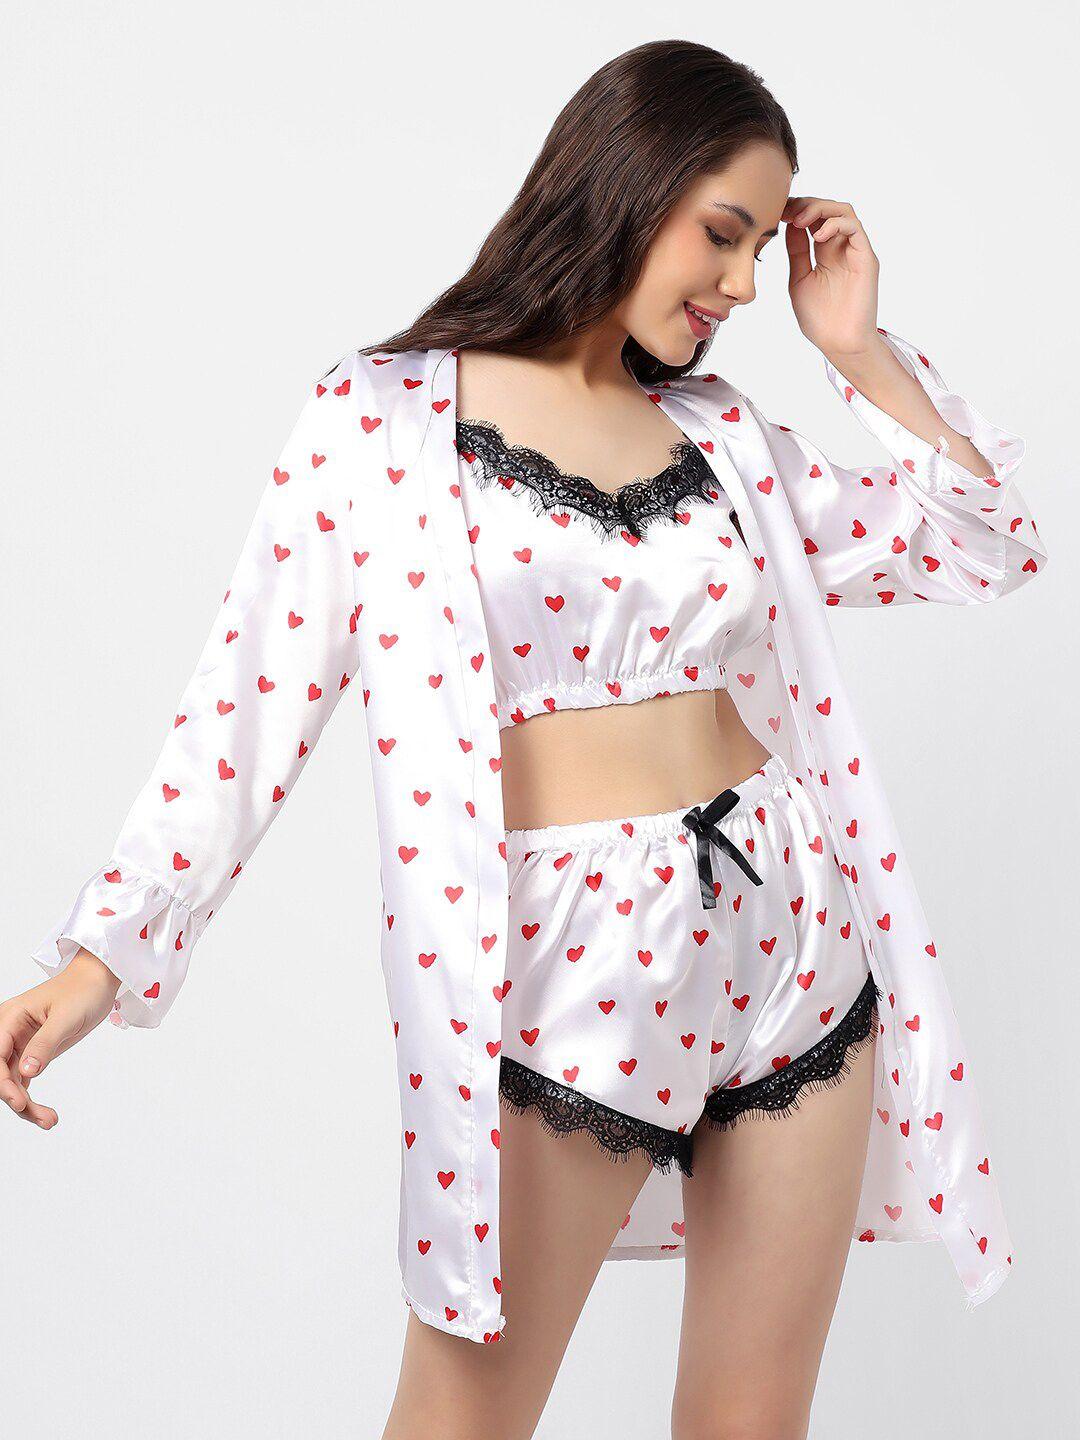 haute sauce by campus sutra women white & red printed night suit